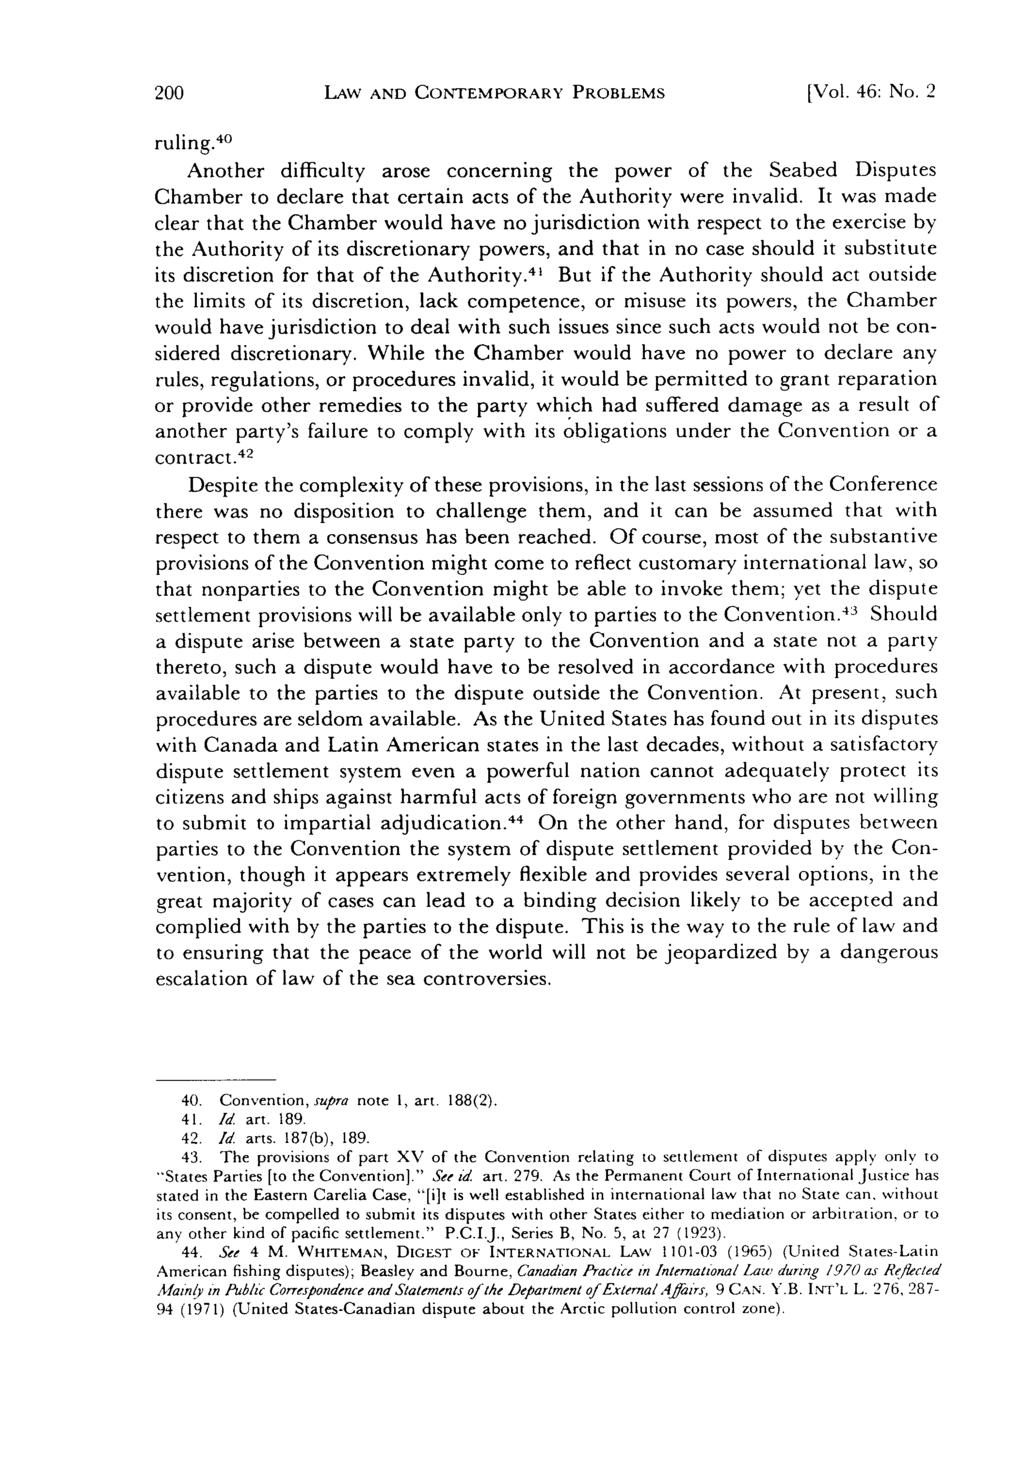 LAW AND CONTEMPORARY PROBLEMS [Vol. 46: No. 2 ruling. 40 Another difficulty arose concerning the power of the Seabed Disputes Chamber to declare that certain acts of the Authority were invalid.